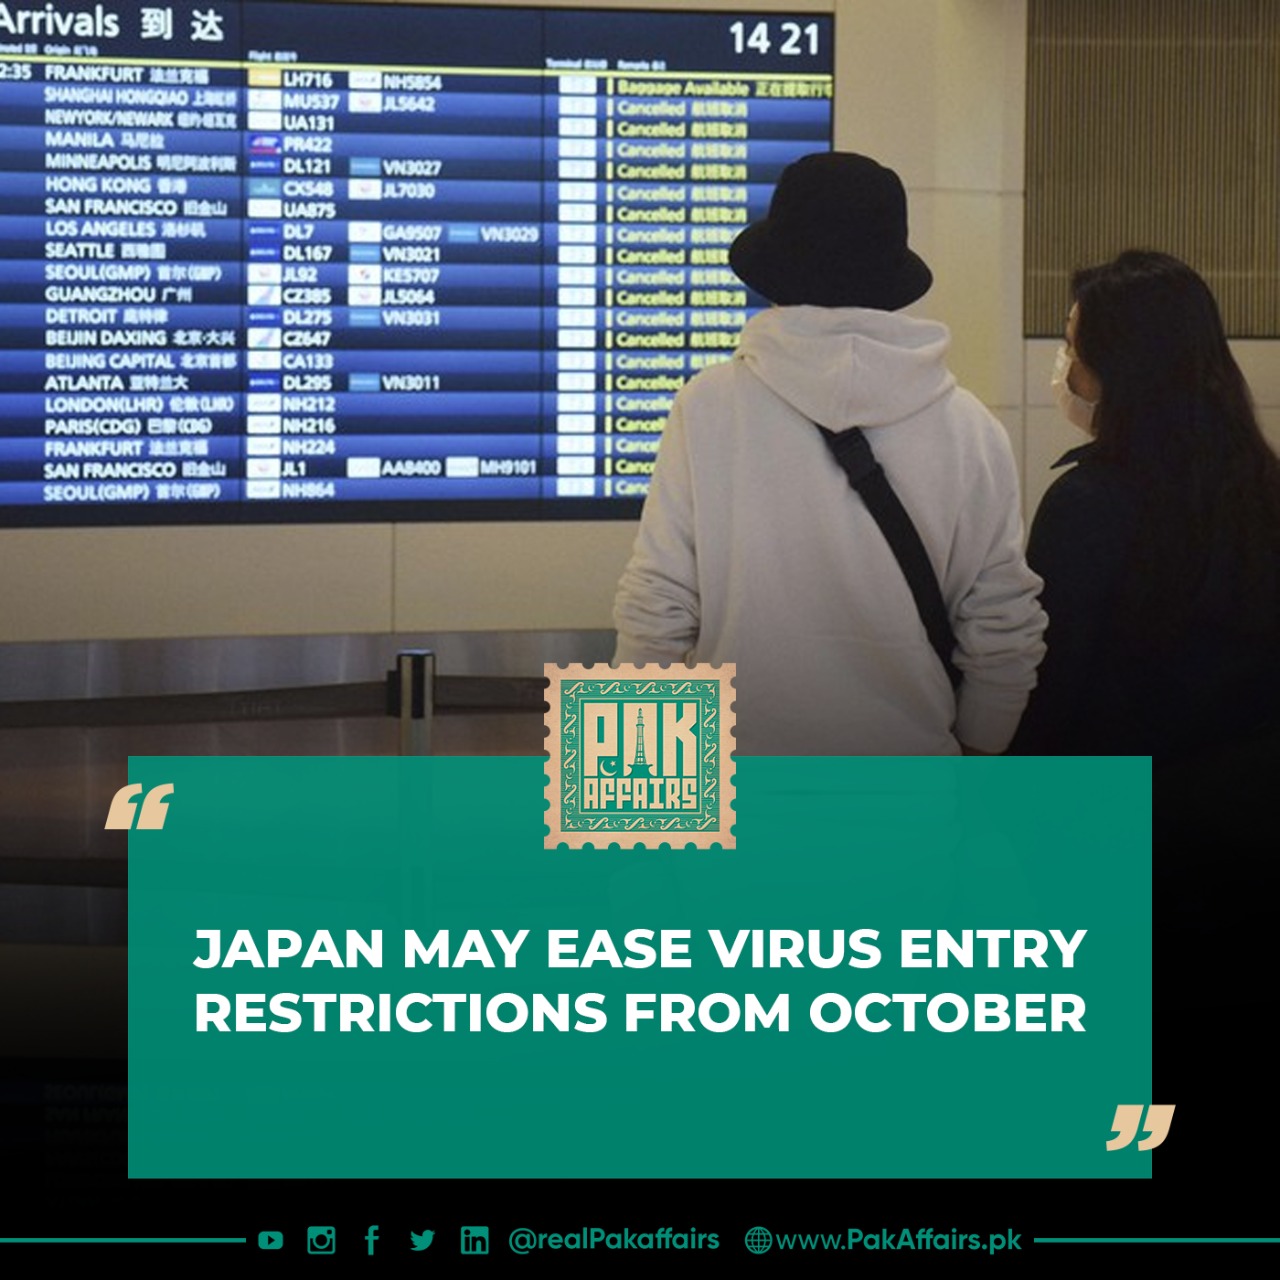 Japan may ease virus entry restrictions from October